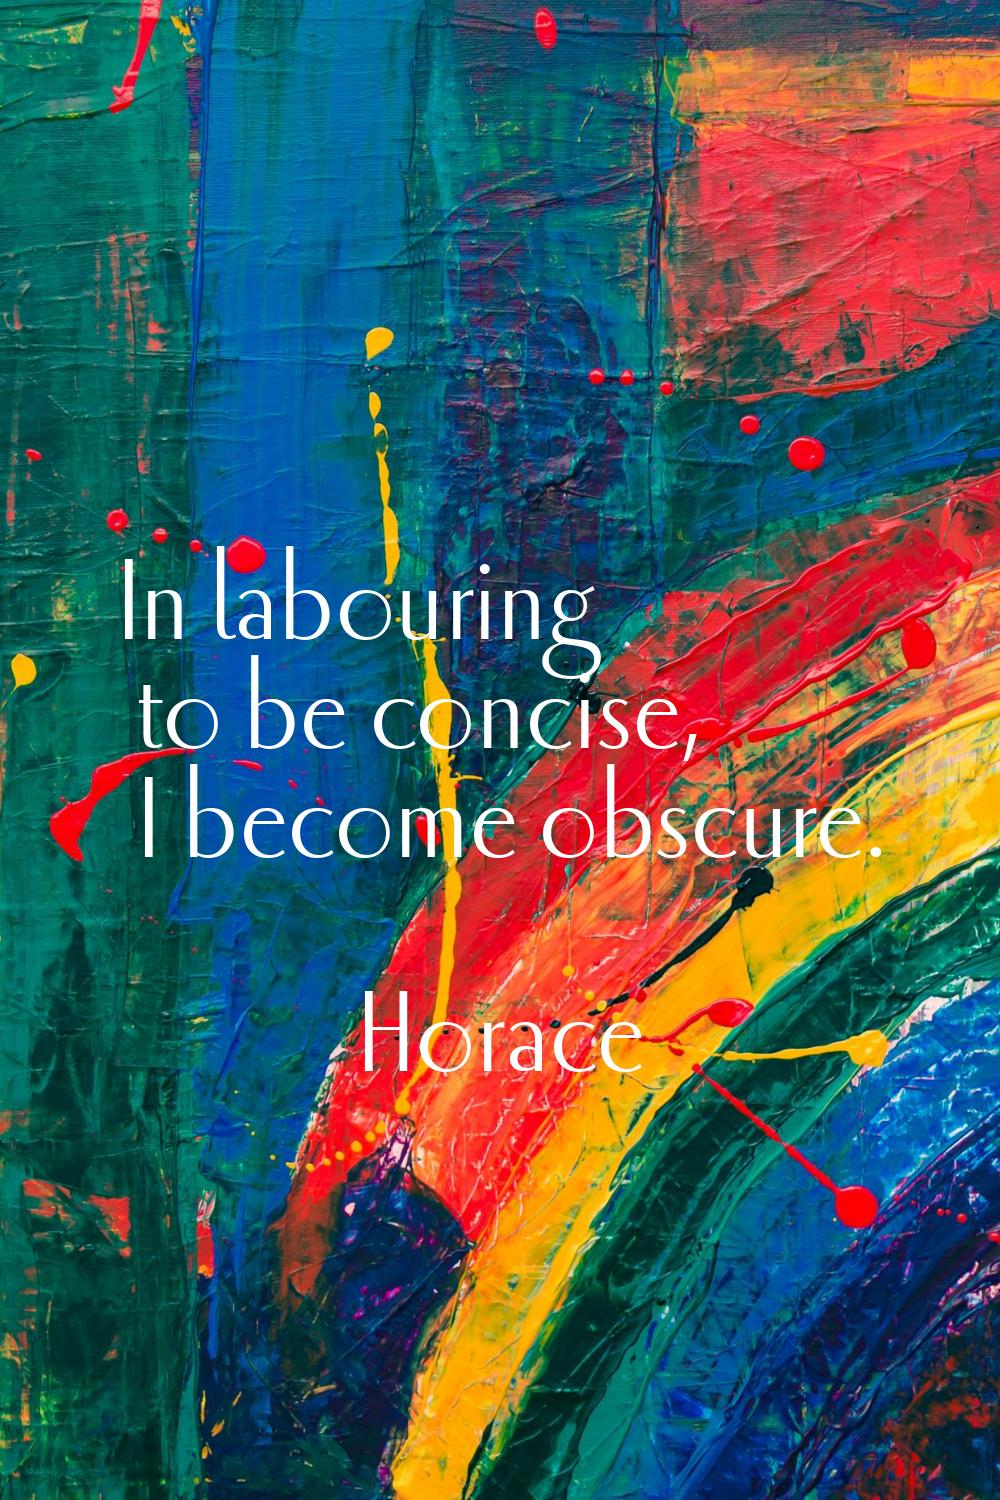 In labouring to be concise, I become obscure.